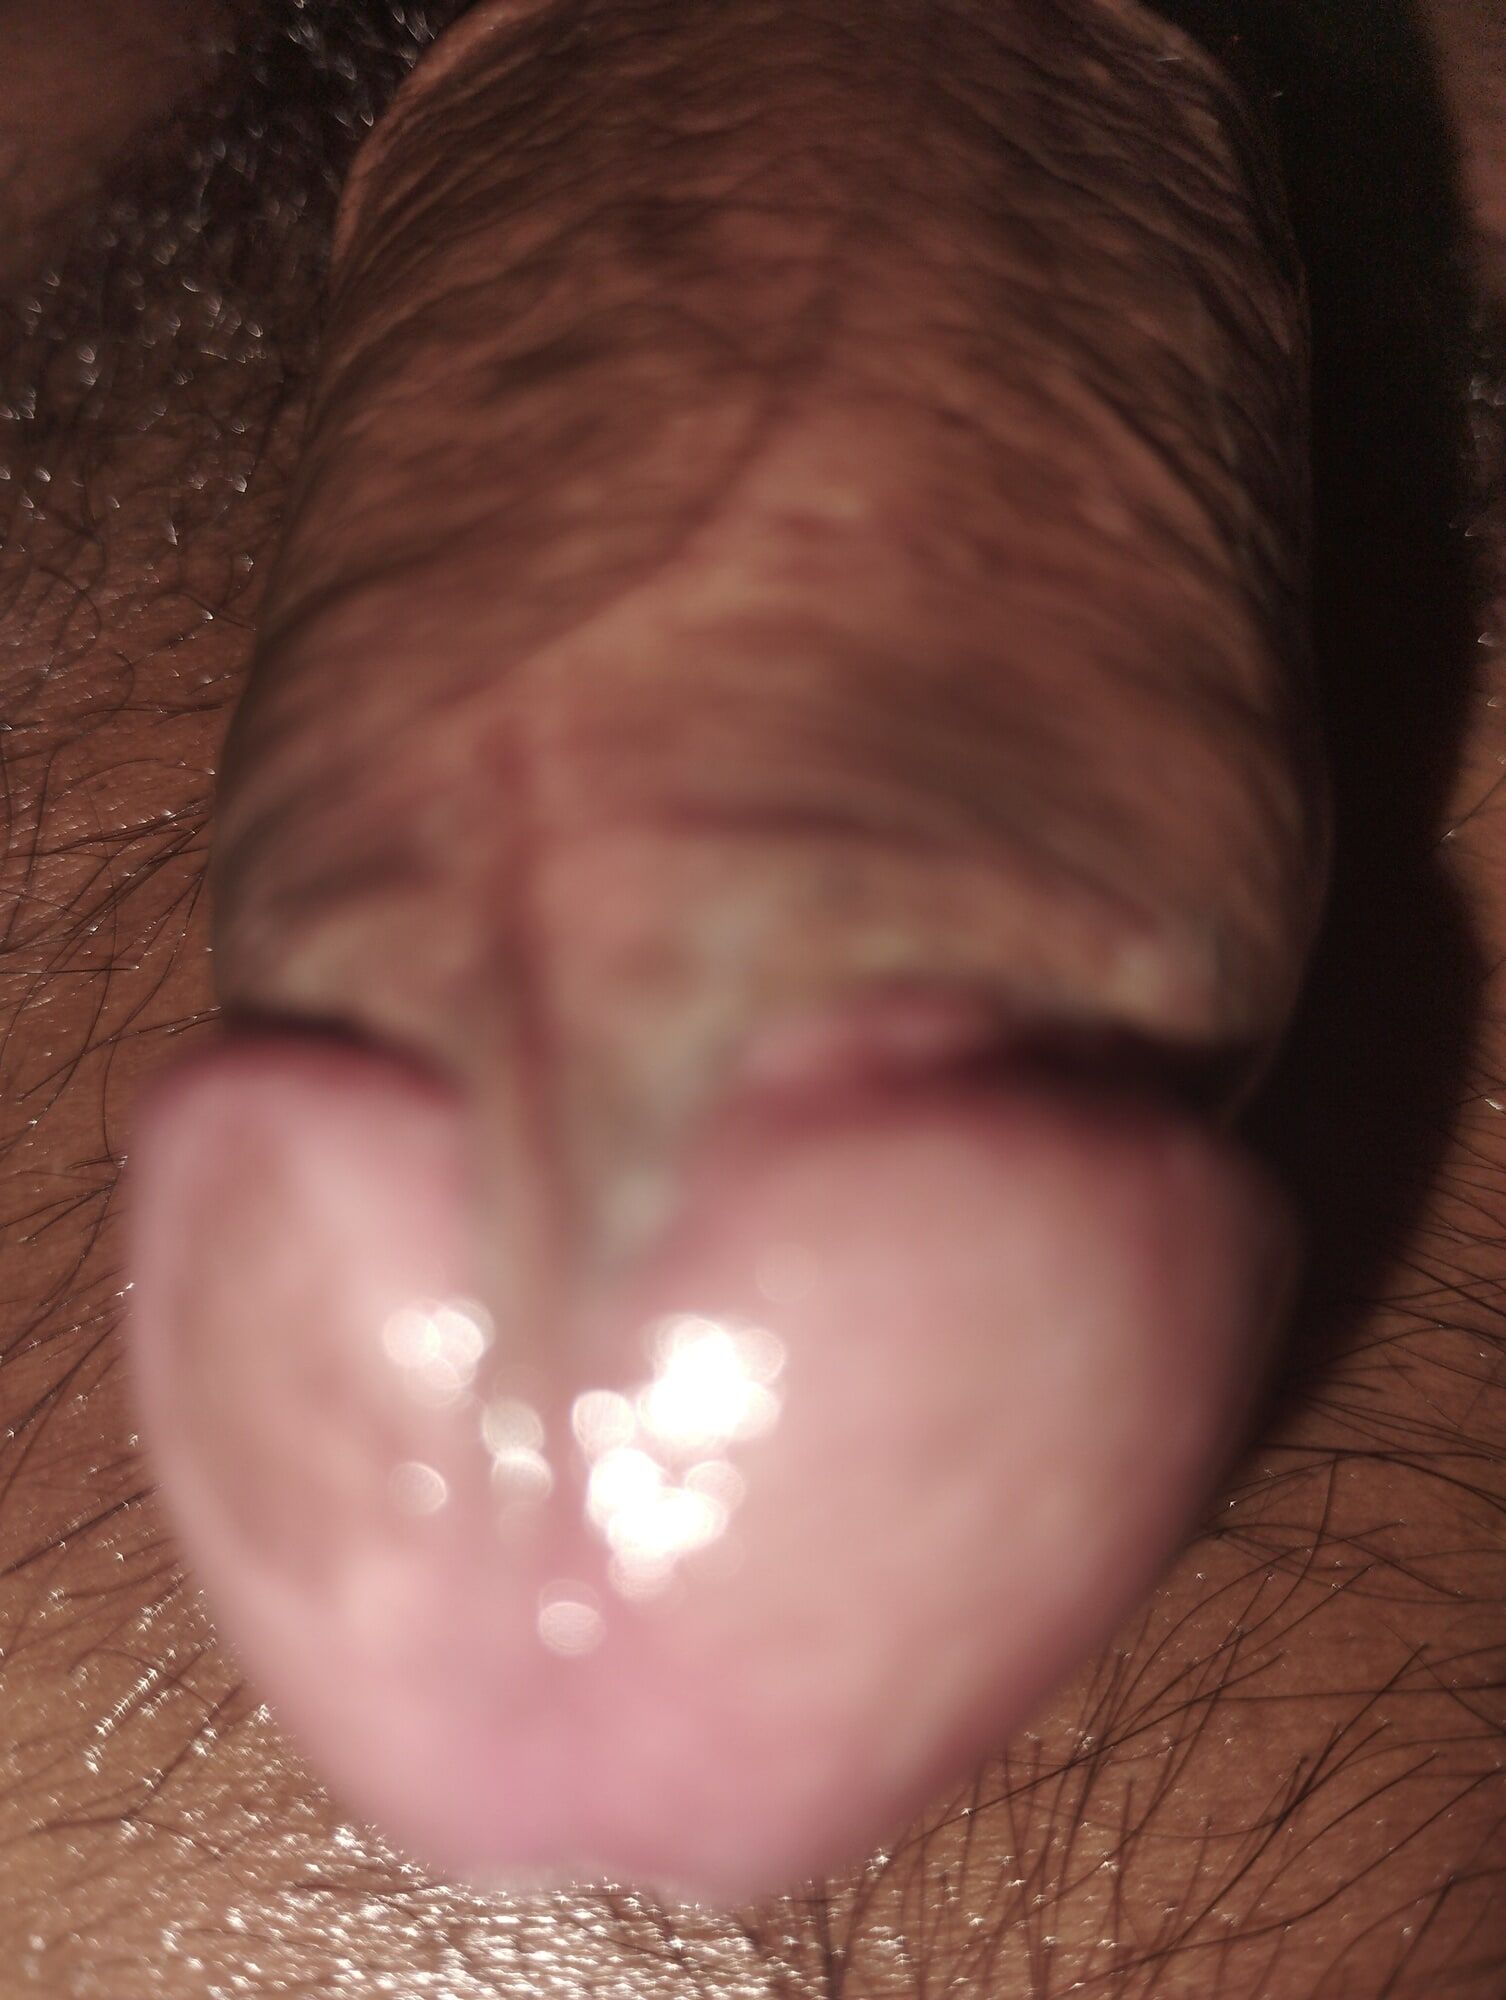 Cock #5